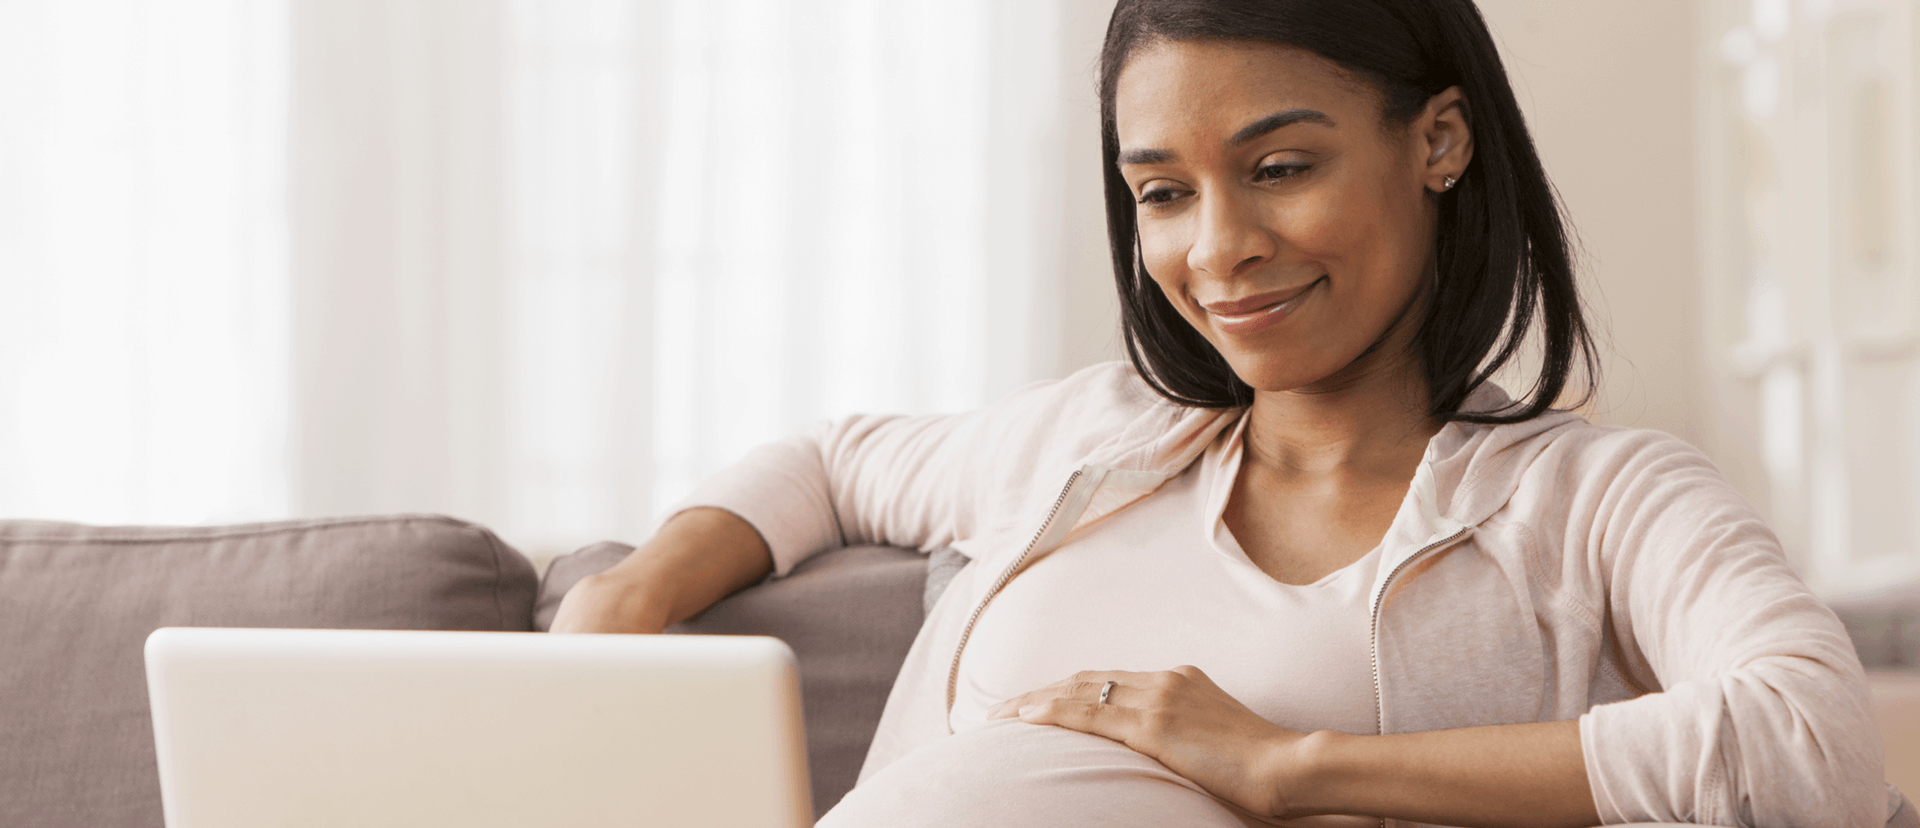 Pregnant women looking at a computer